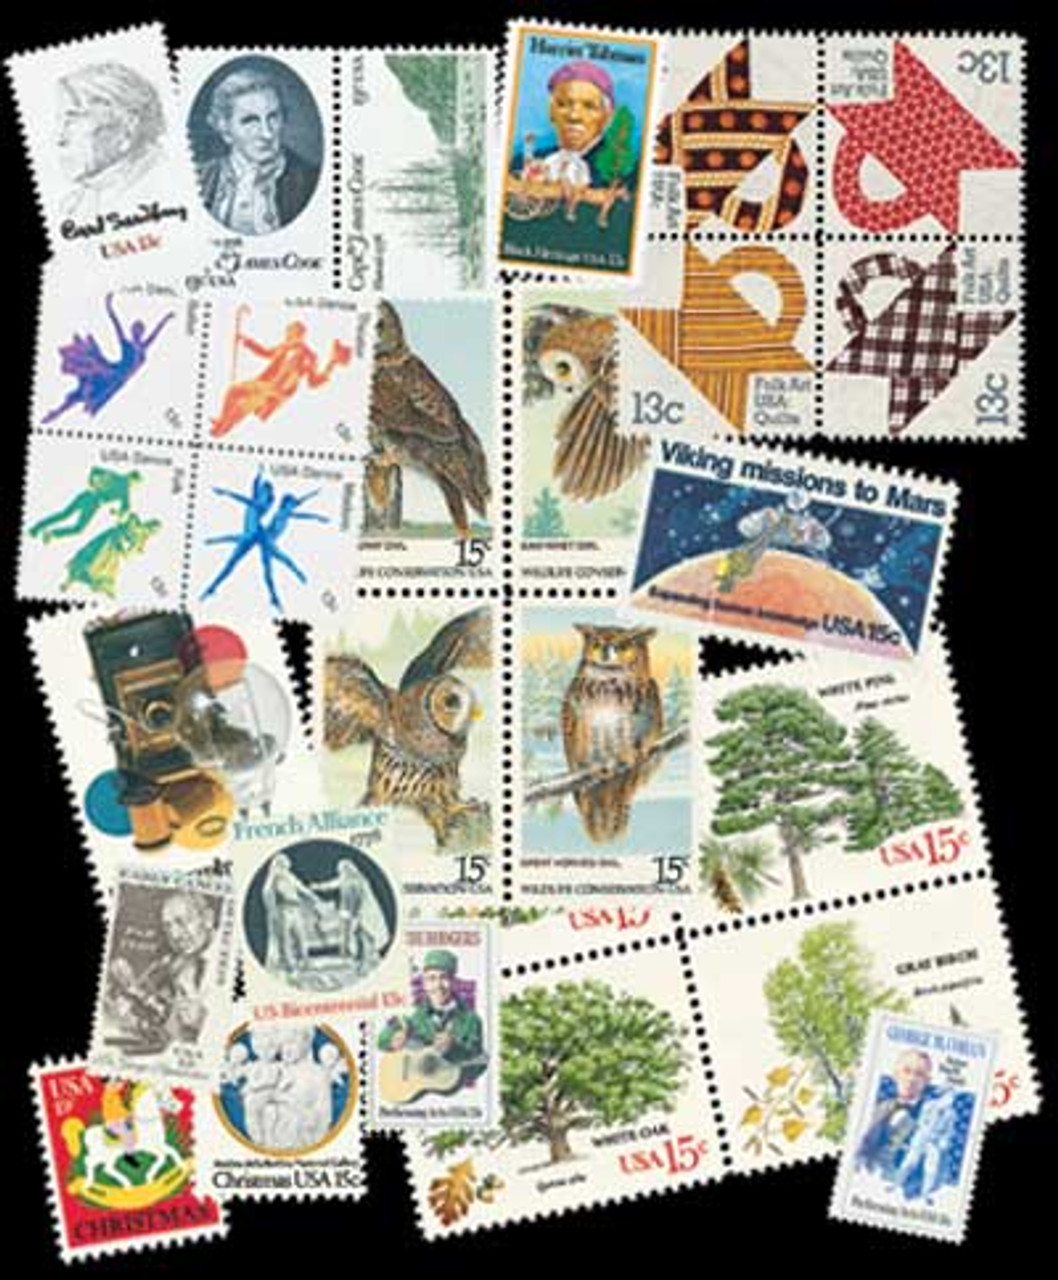 Vintage Postage Stamps (25pcs) – Sumthings of Mine